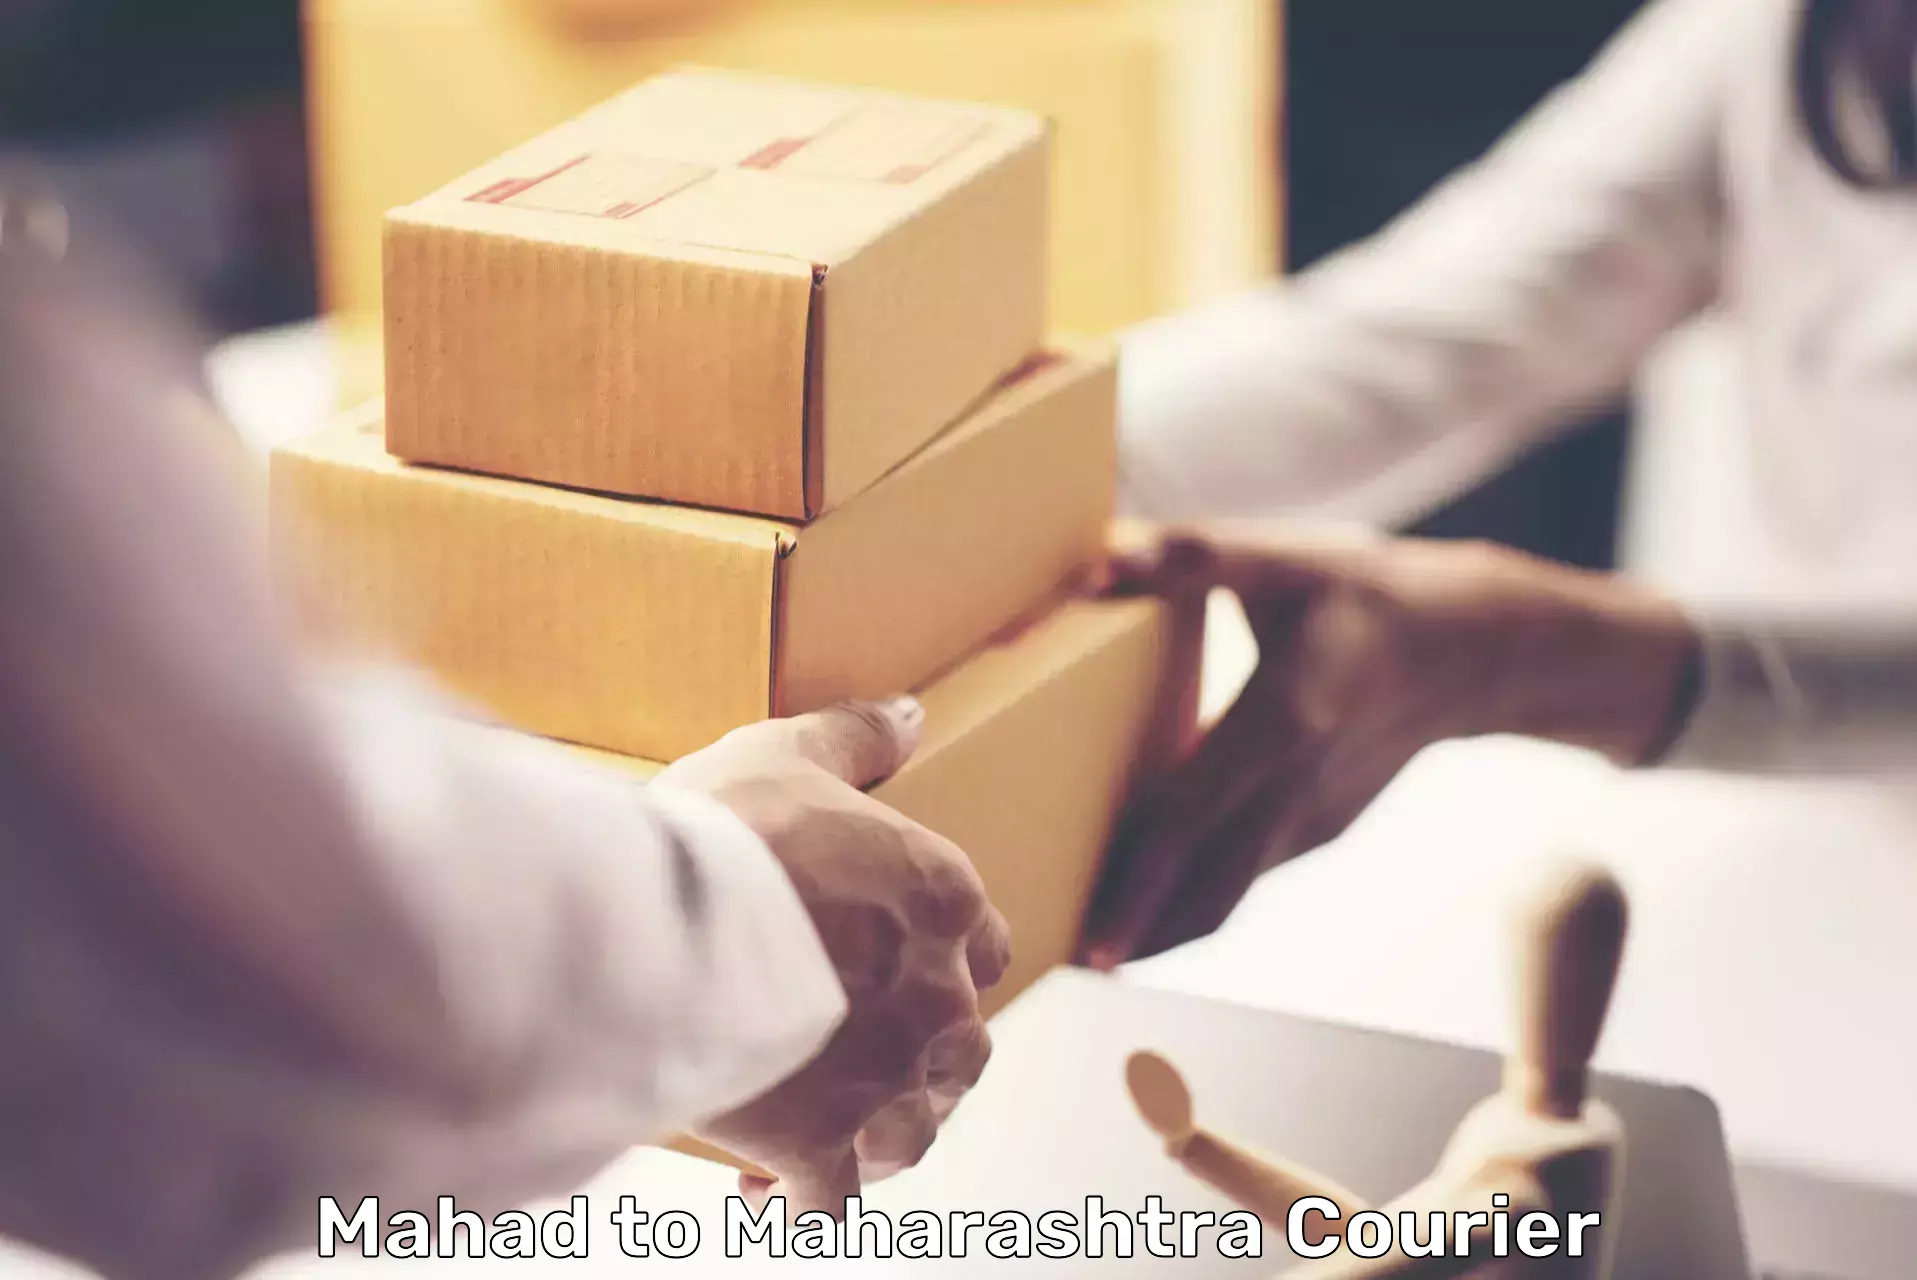 User-friendly courier app Mahad to Kalyan